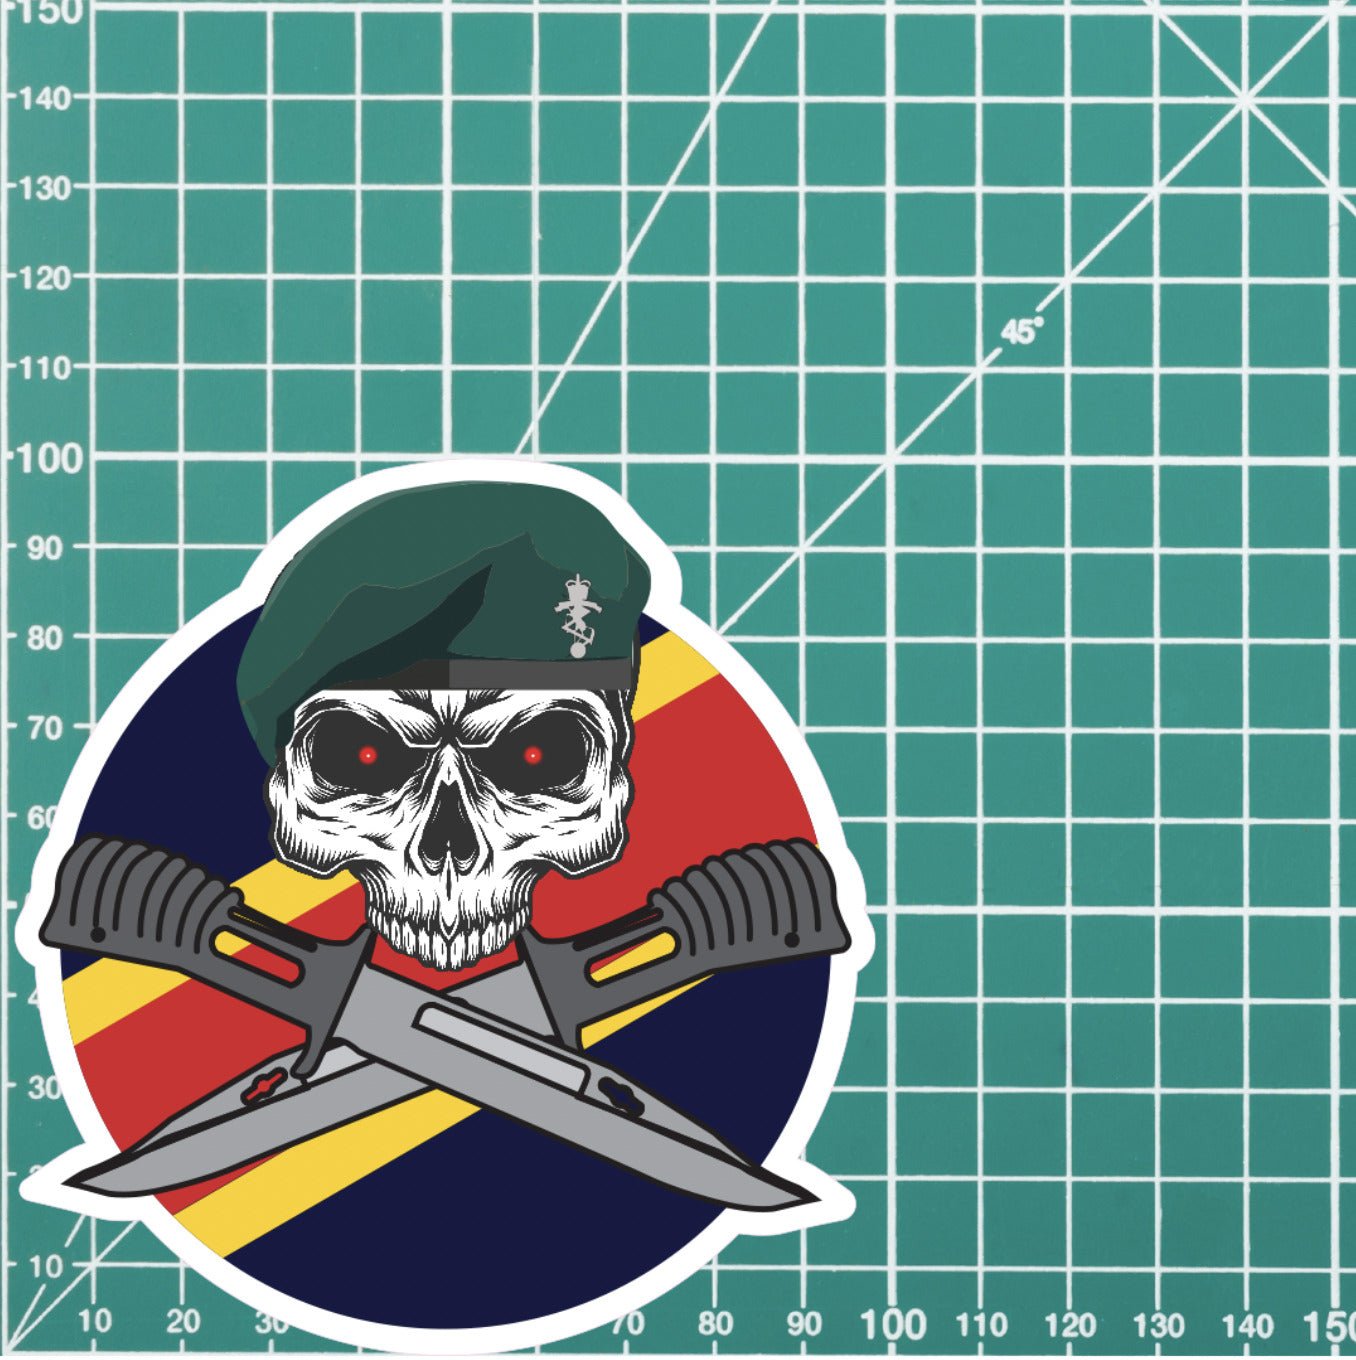 REME Commando Car Decal - Stylish Skull and Crossed Bayonets Design redplume